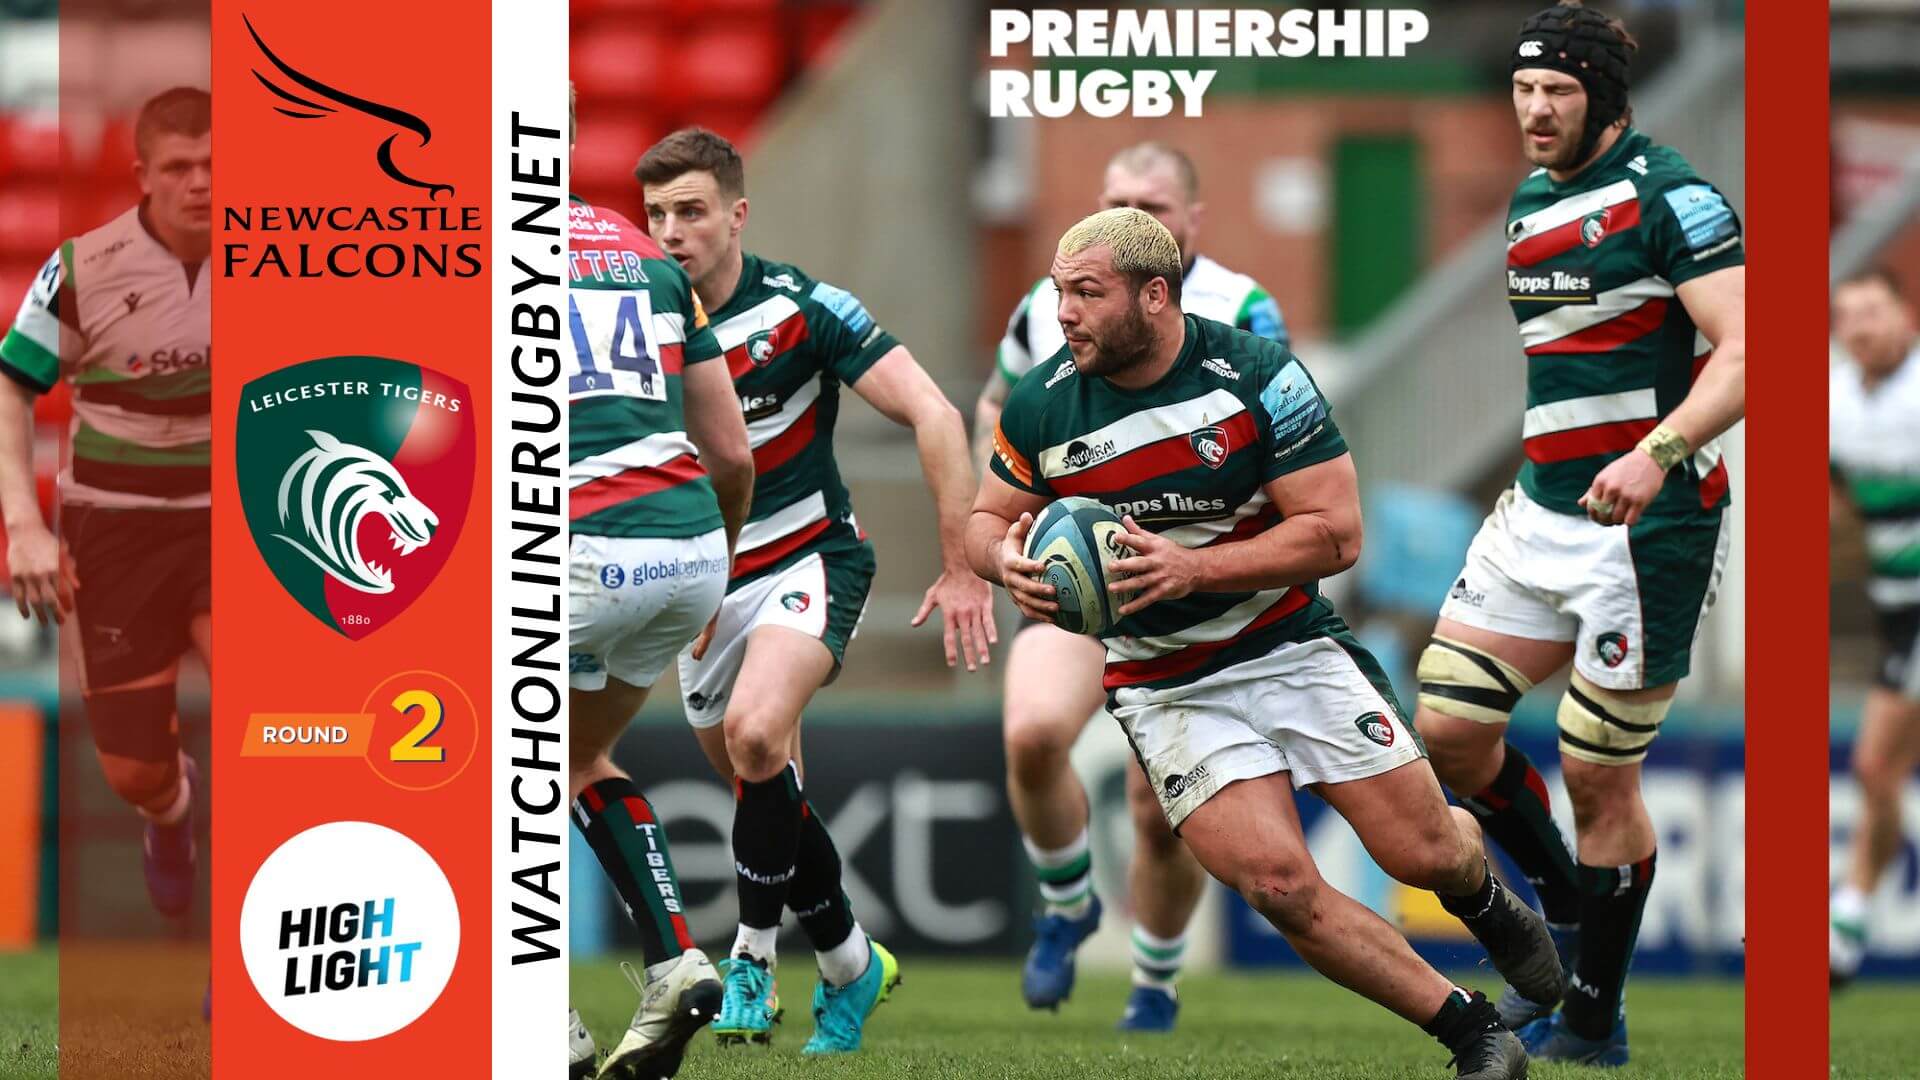 Leicester Tigers Vs Newcastle Falcons Premiership Rugby 2022 RD 2